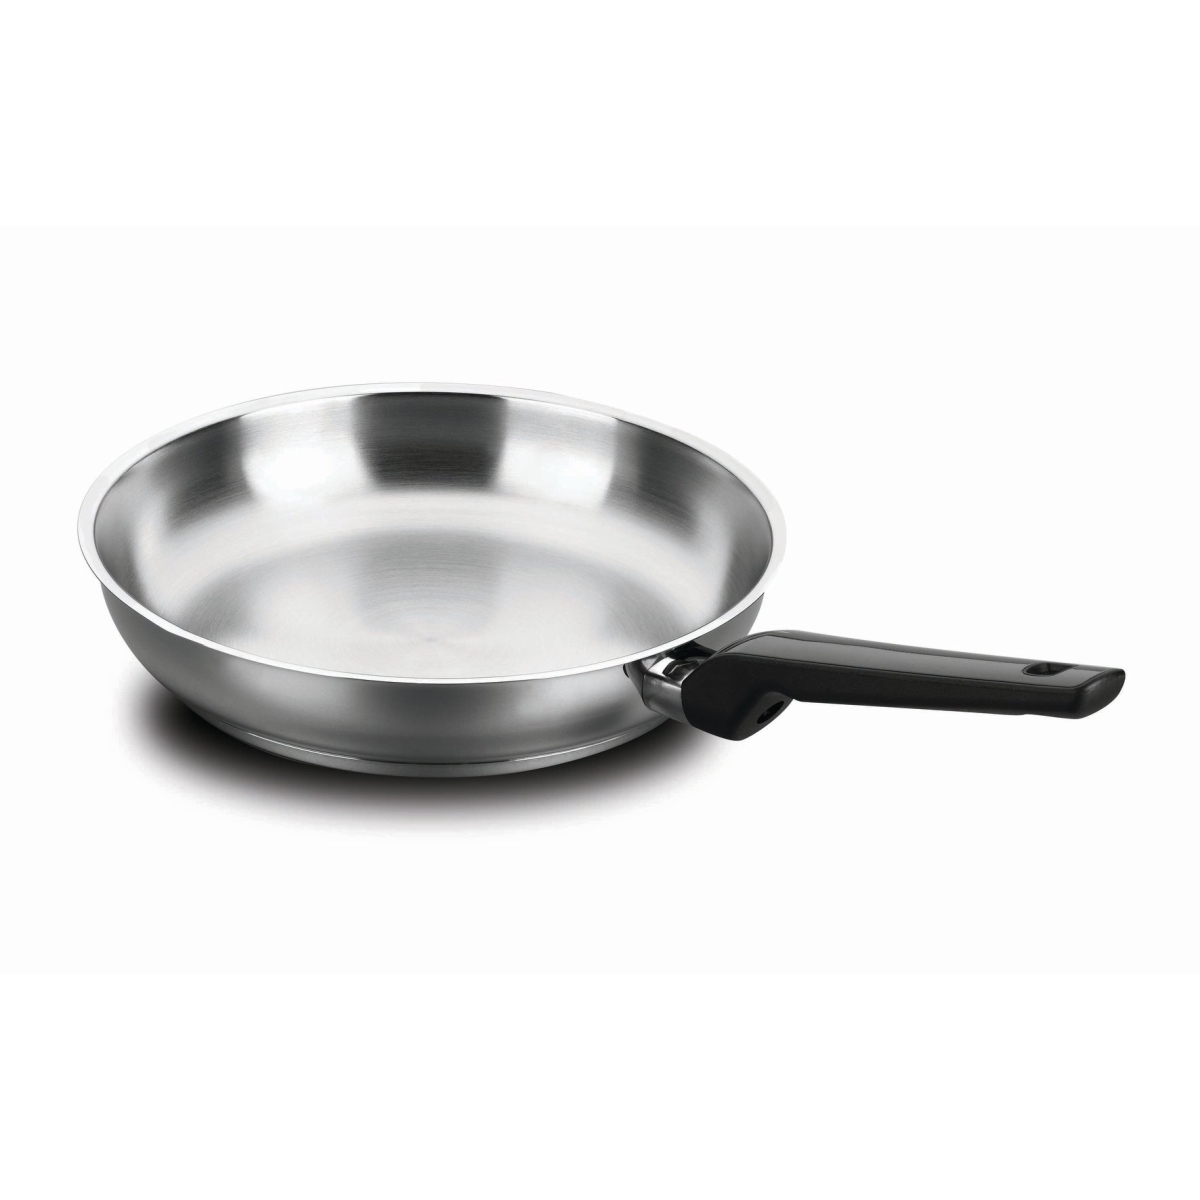 Korkmaz A1909 10 In. Classic 18 By 10 Stainless Steel Deep Frying Stir Fry Pan